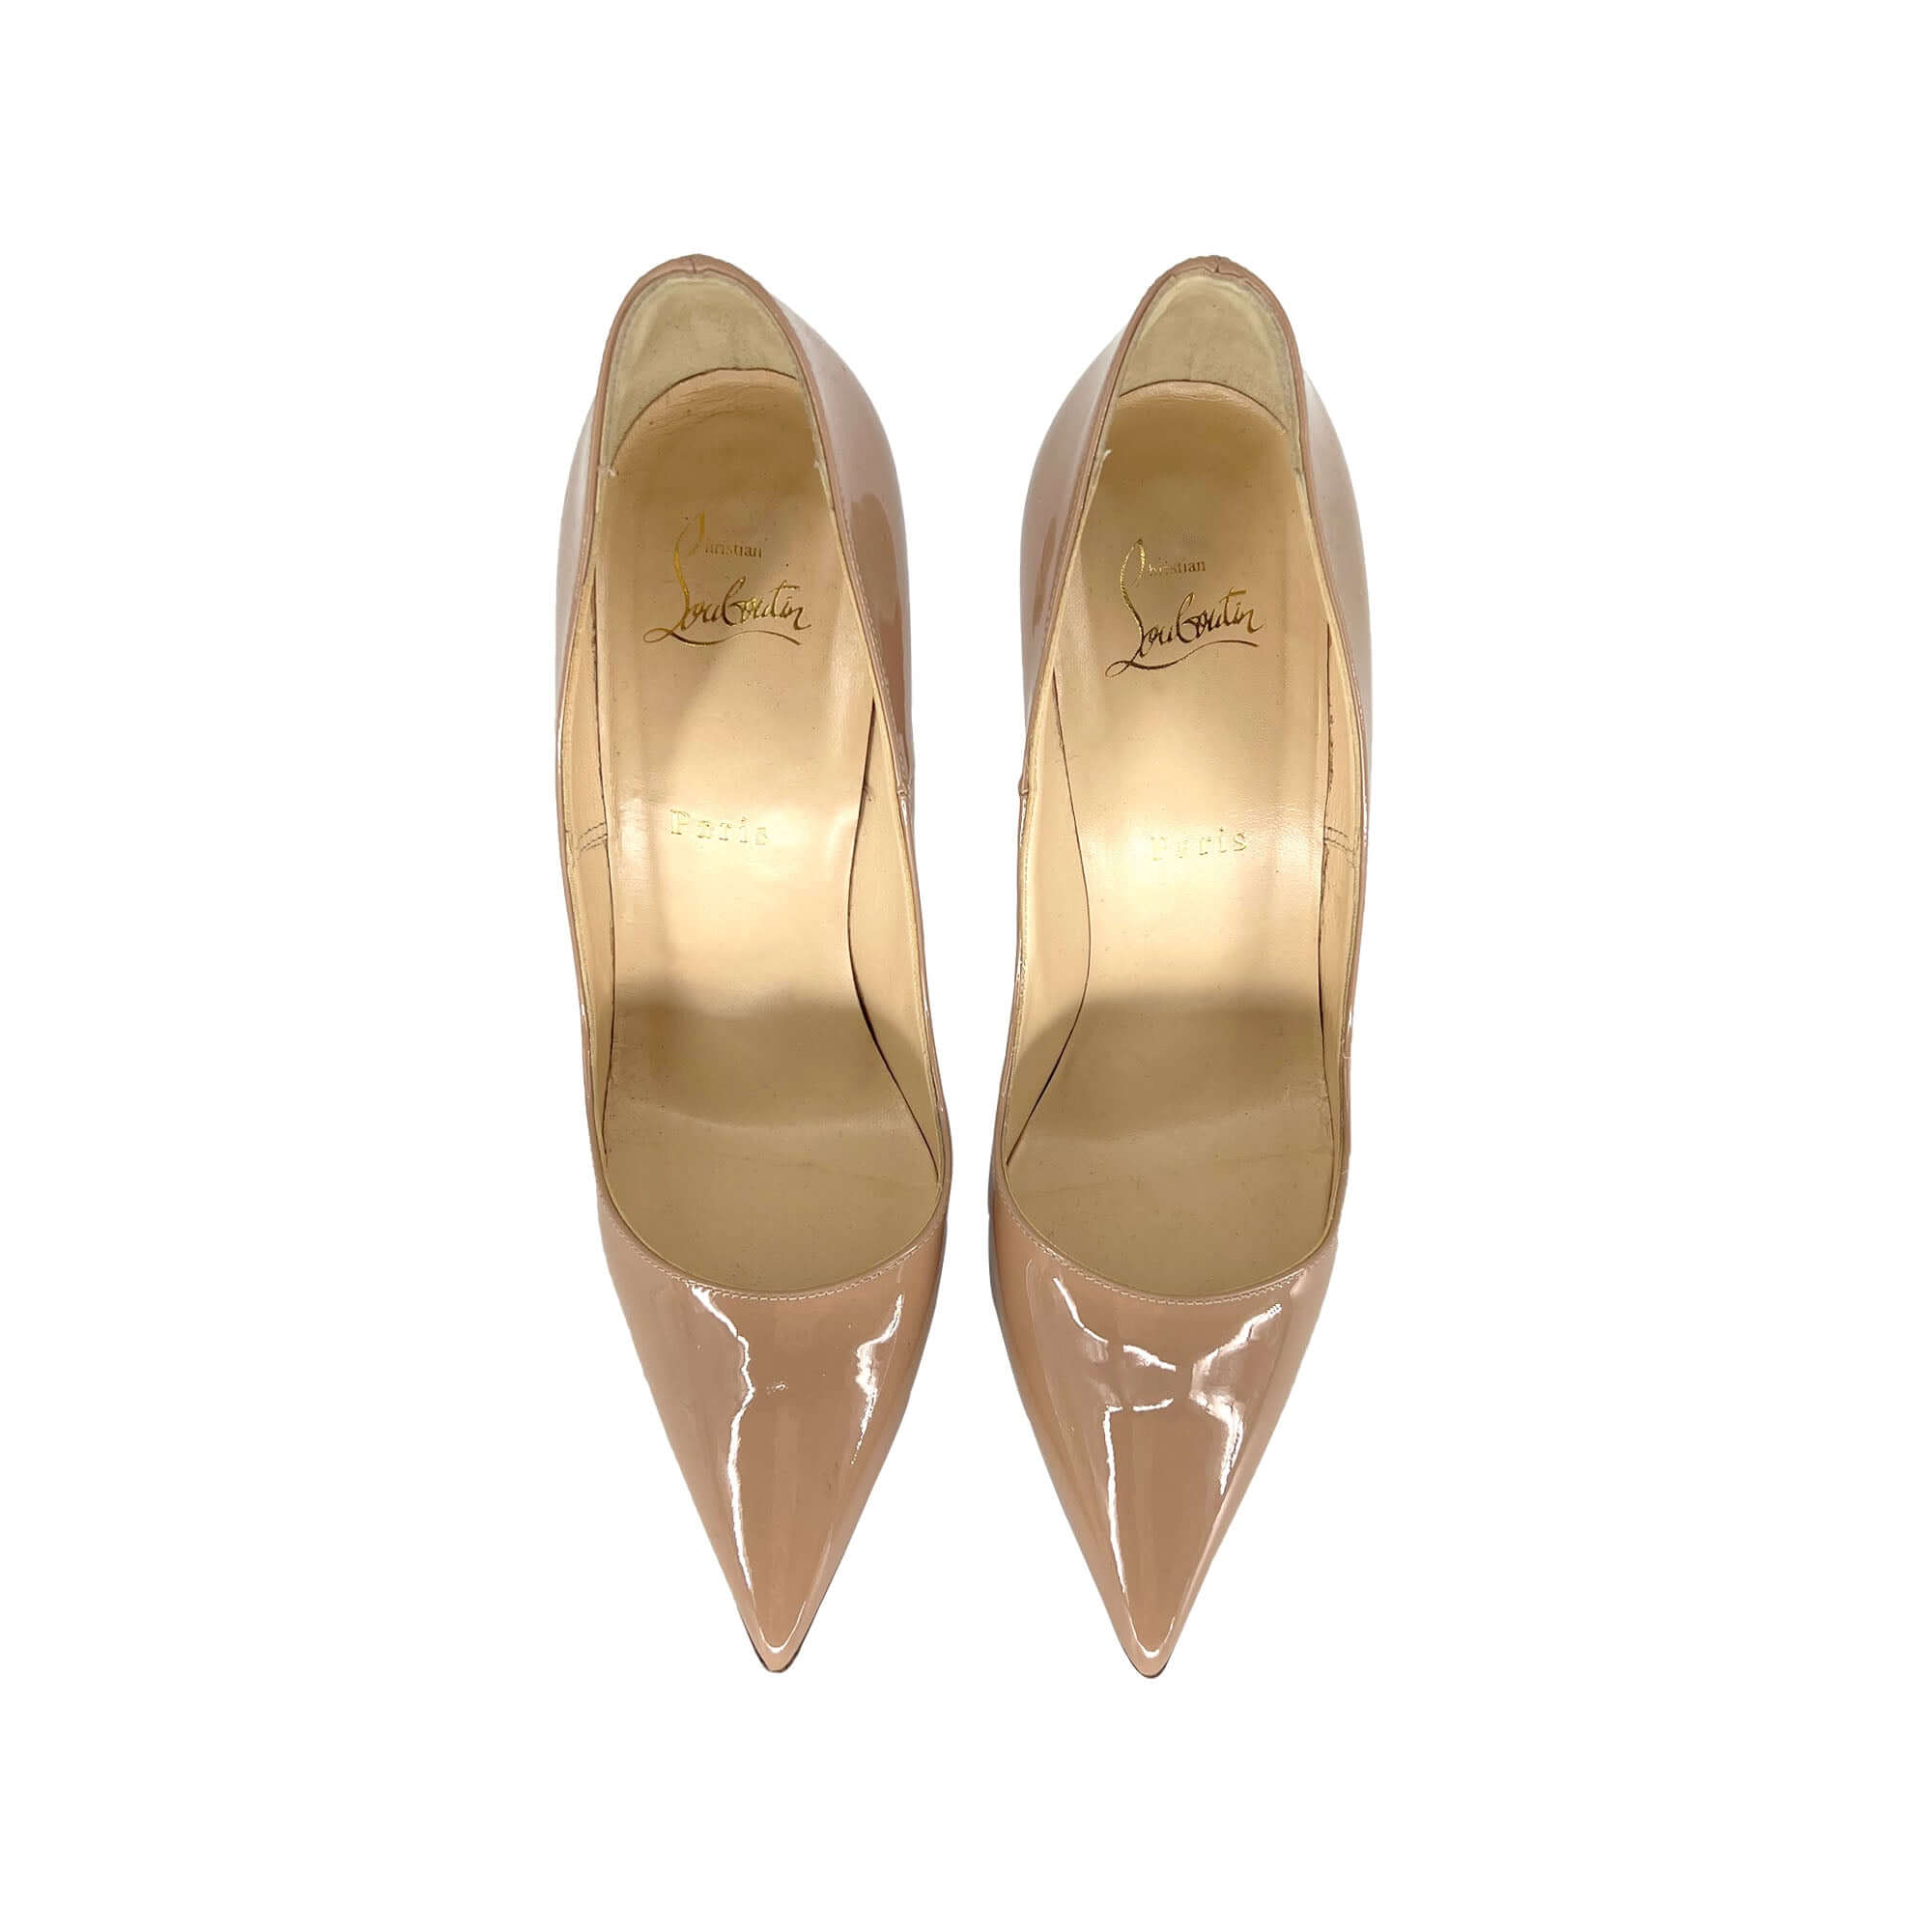 Christian Louboutin So Kate Nude Patent Leather Heels